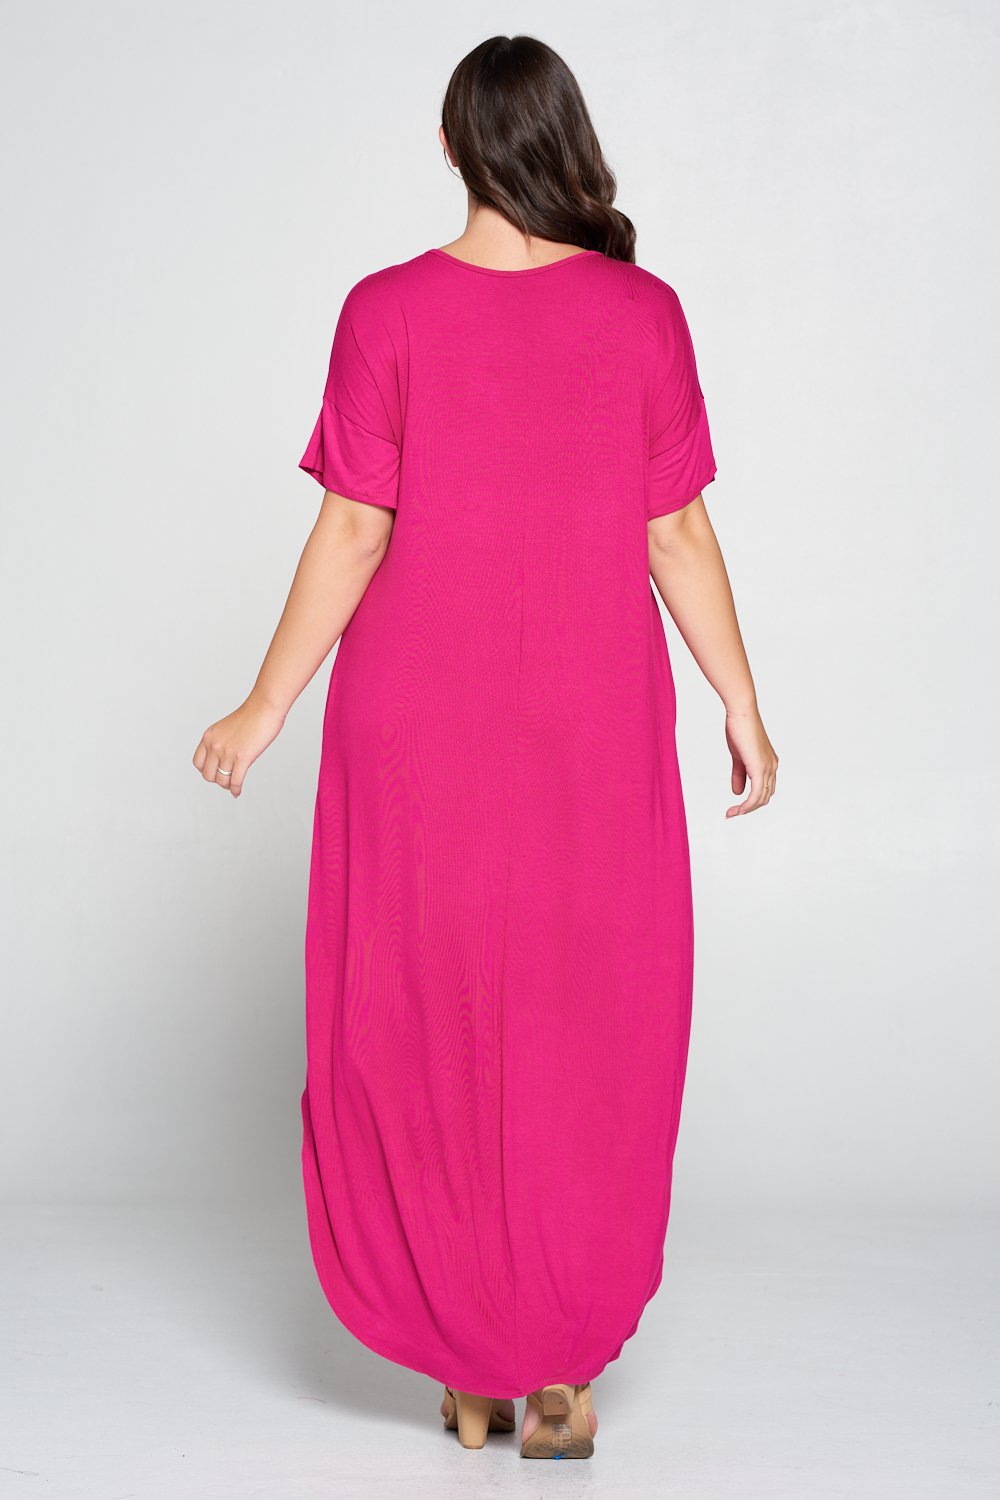 livd L I V D women's contemporary plus size clothing high low hi lo dress with pockets v neck sleeves in fuchsia mix of pink purple